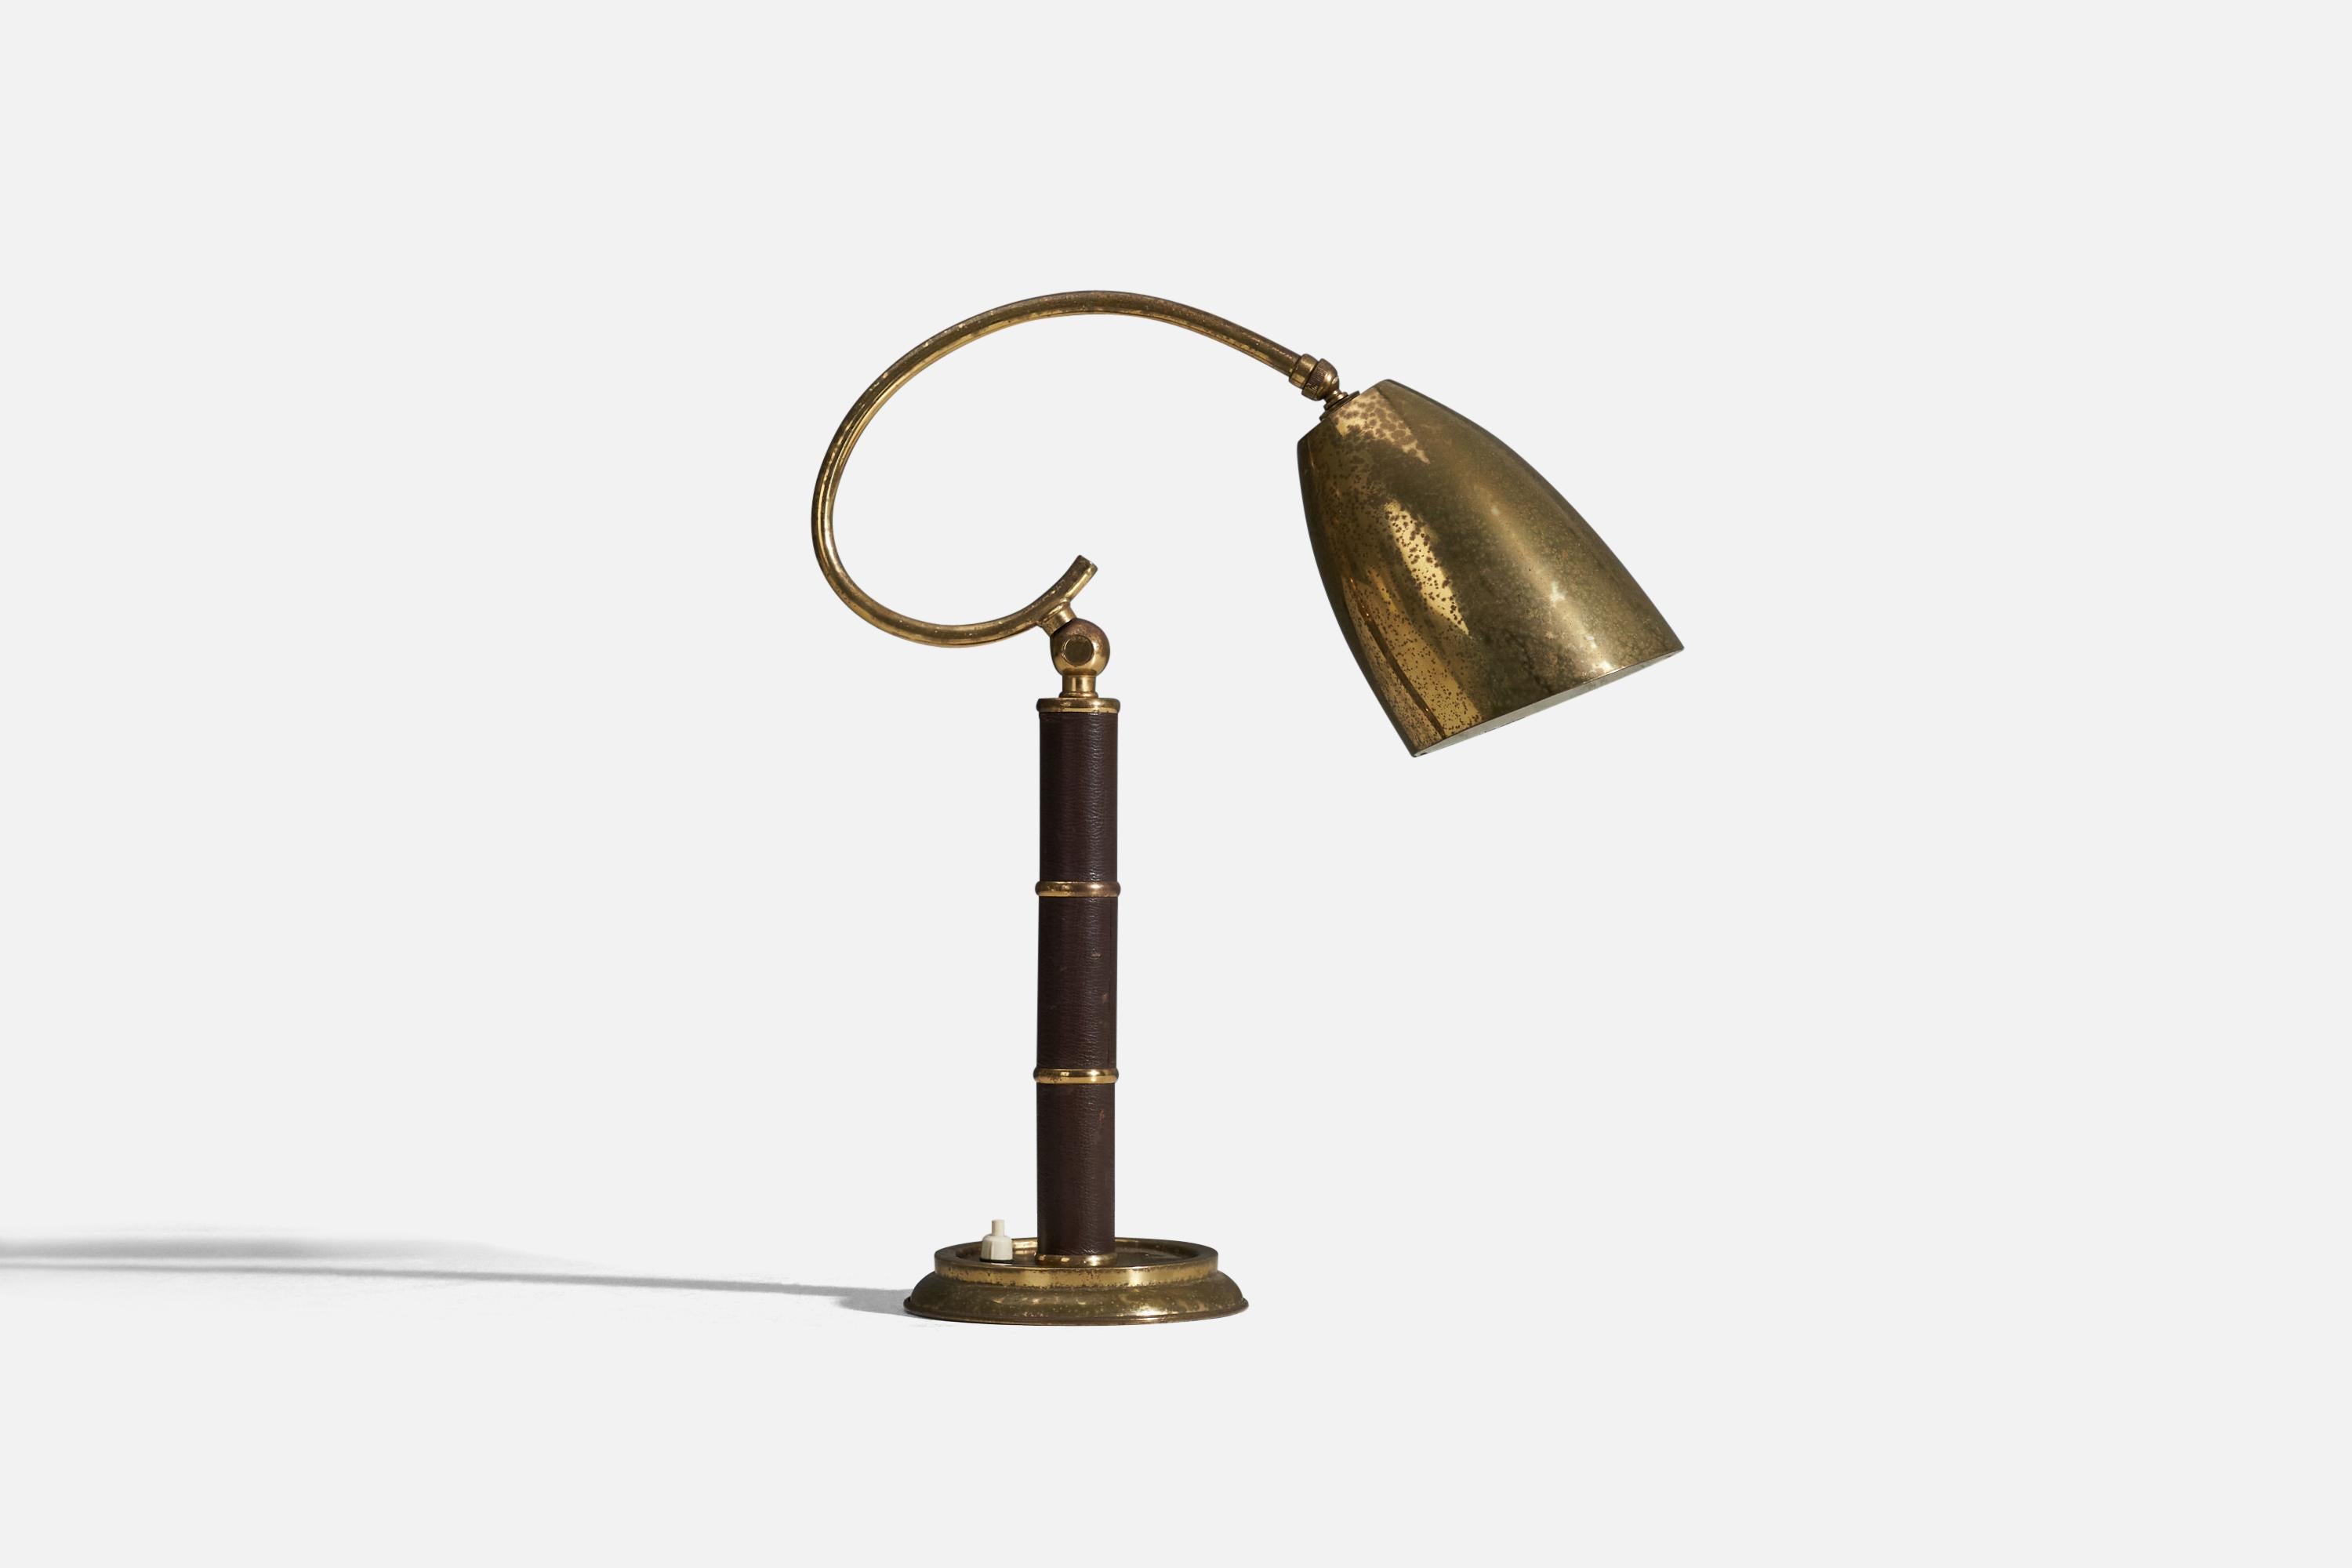 An adjustable, brass and leather table lamp designed and produced in Italy, 1940s.

Dimensions variable, measured as illustrated in first image.

Socket takes standard E-26 medium base bulb.

There is no maximum wattage stated on the fixture.